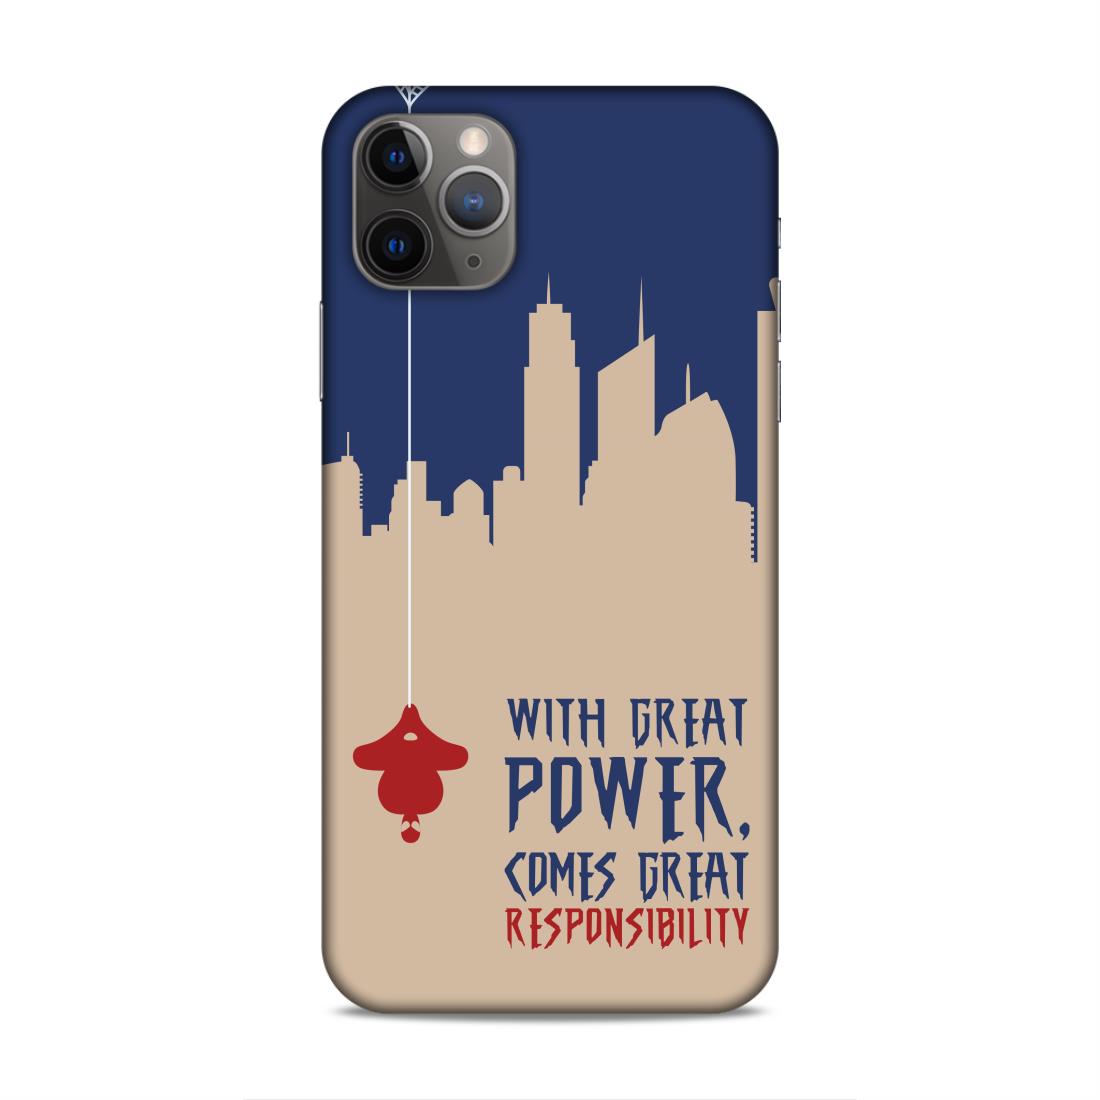 Great Power Comes Great Responsibility Hard Back Case For Apple iPhone 11 Pro Max